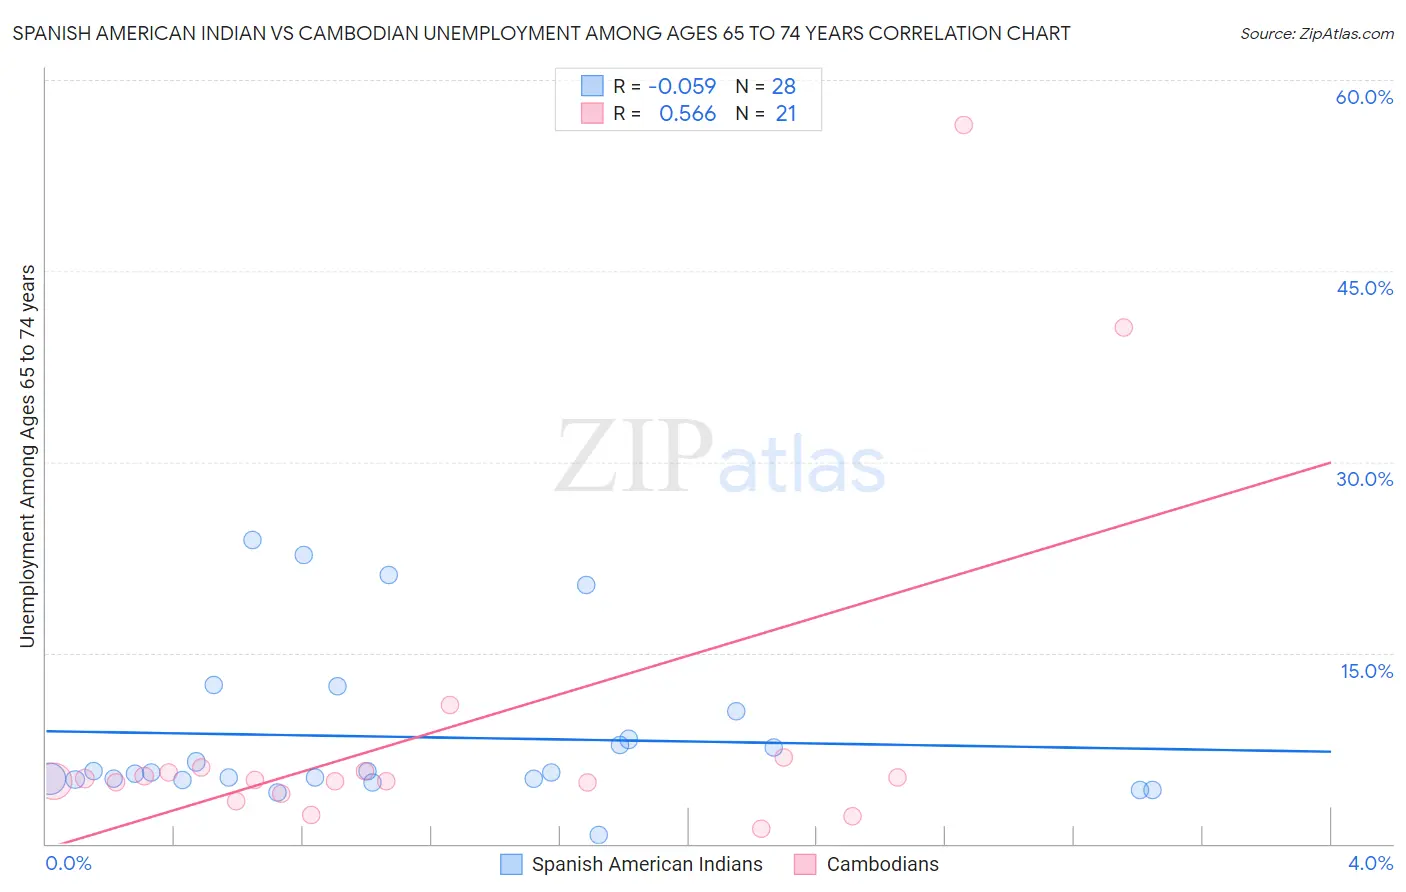 Spanish American Indian vs Cambodian Unemployment Among Ages 65 to 74 years